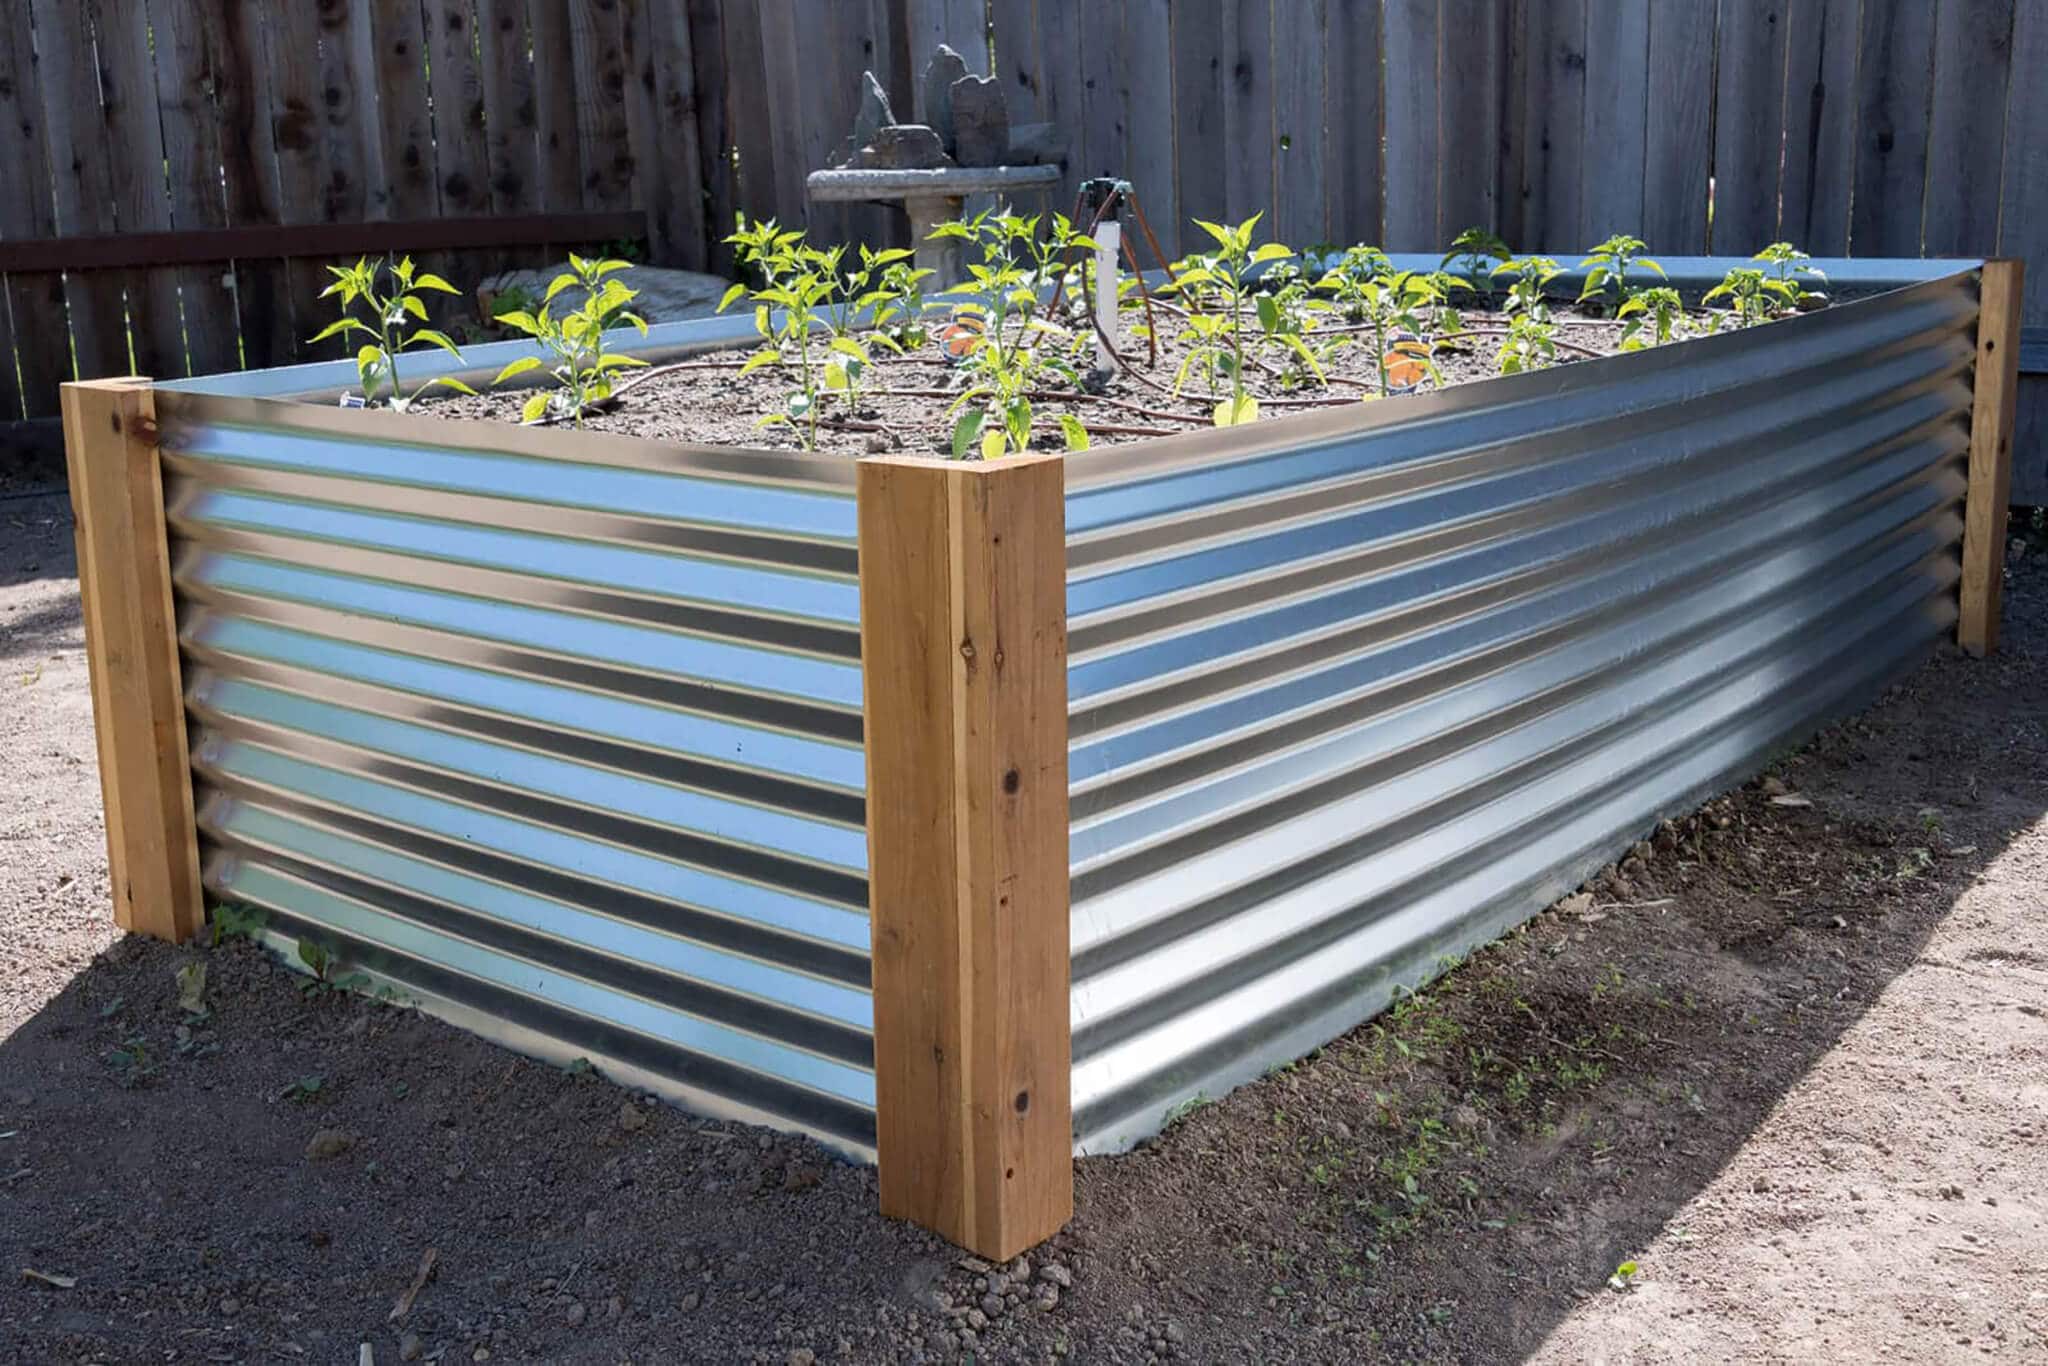 How To Build A Metal Raised Garden Bed, How To Build High Raised Garden Beds